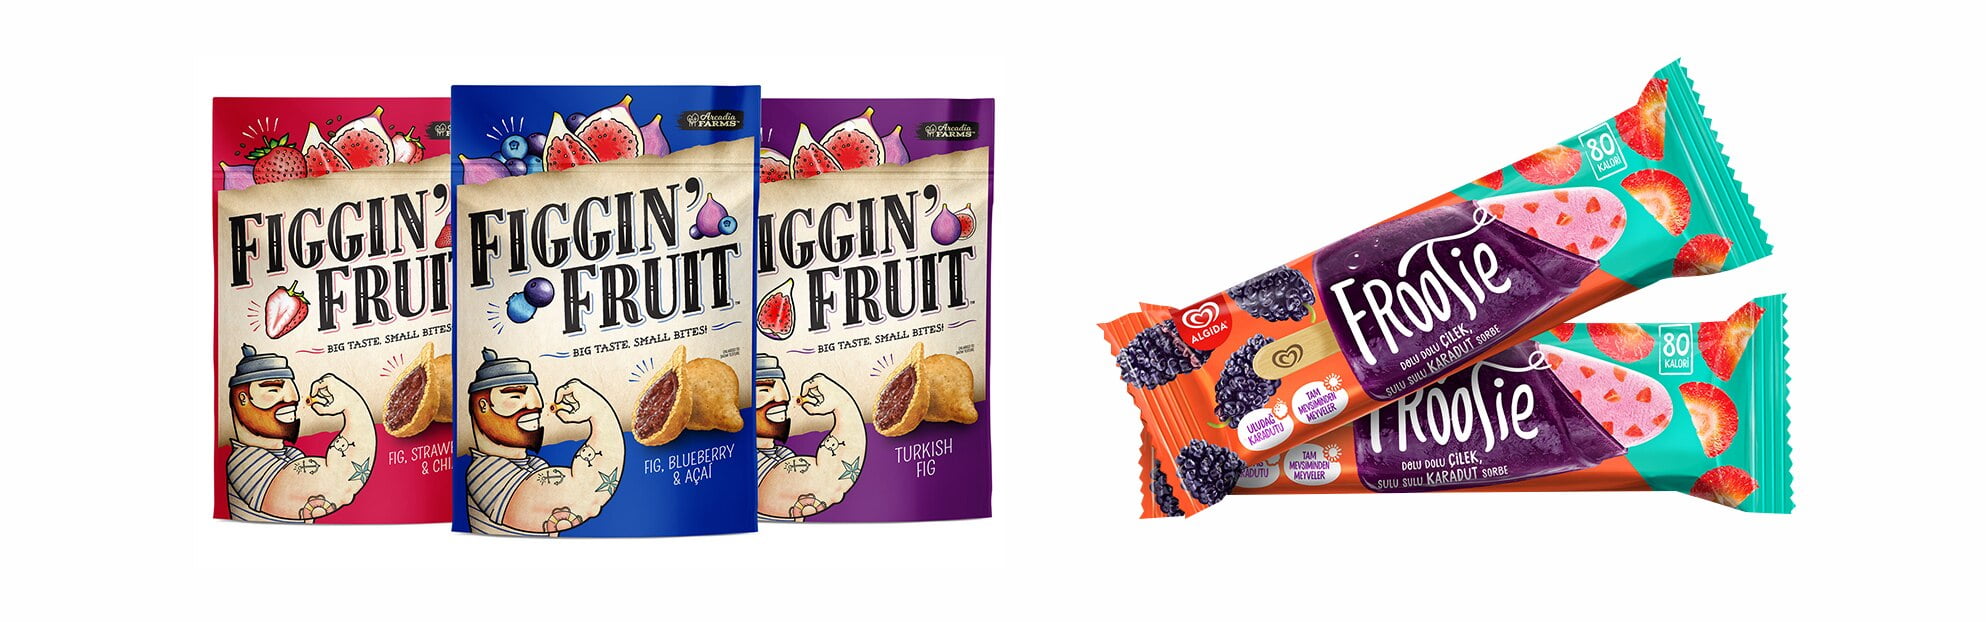 custom-made-printed-mockup-stand-up-doy-pouch-bags-and-sachets-for-dry-fruit-packaging.jpg